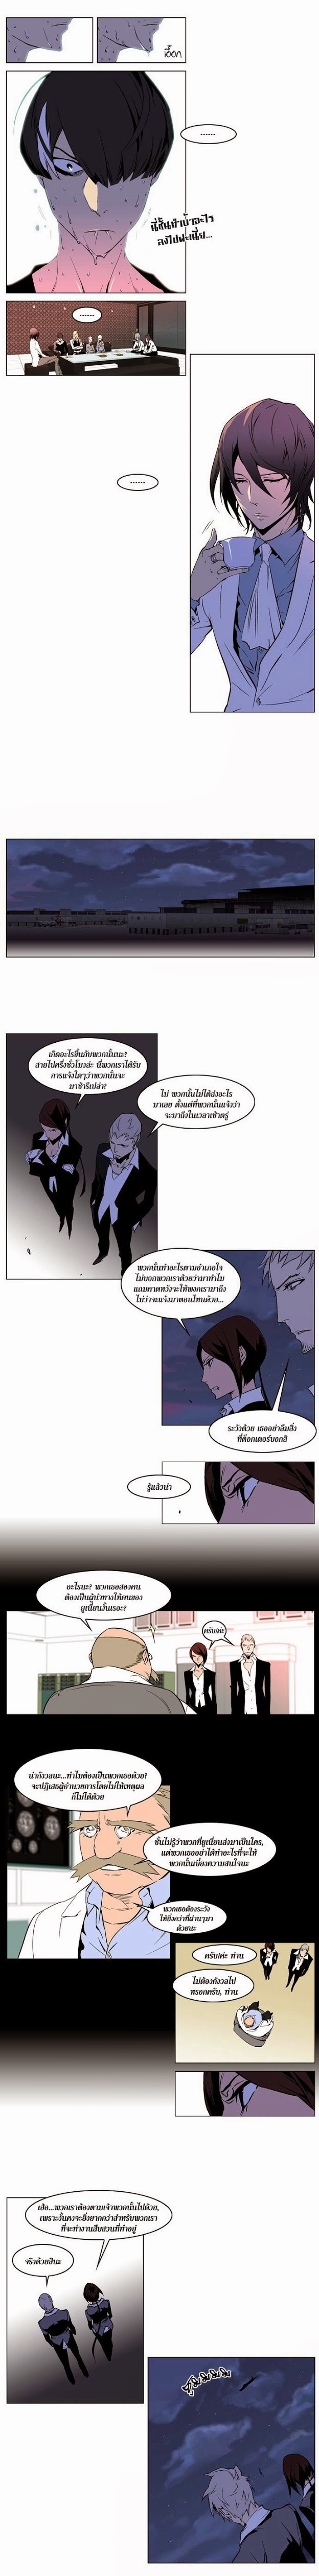 Noblesse 211 006